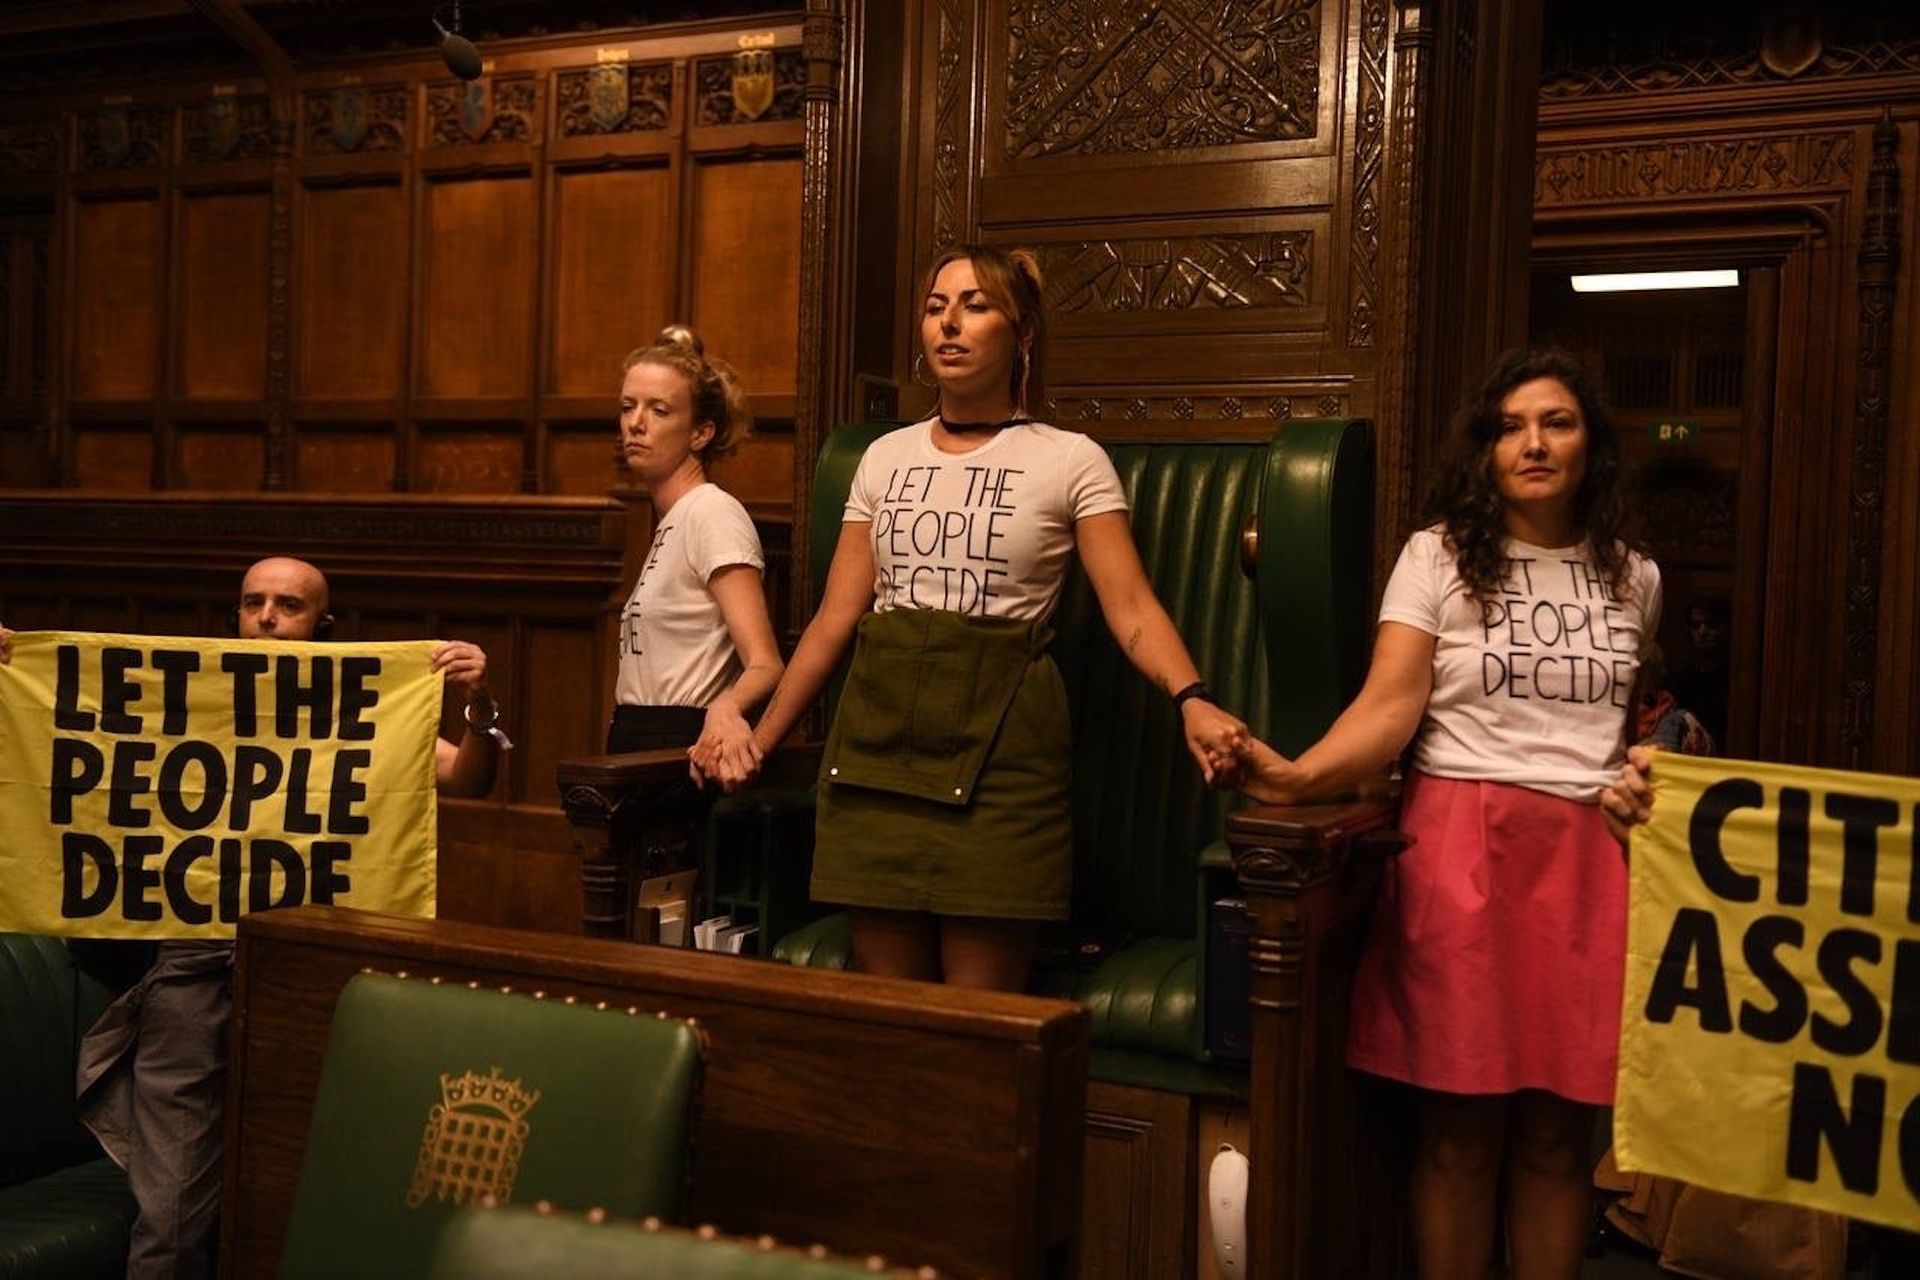 Extinction Rebellion activists protest inside the House of Commons at Parliament in London Photo courtesy Extinction Rebellion